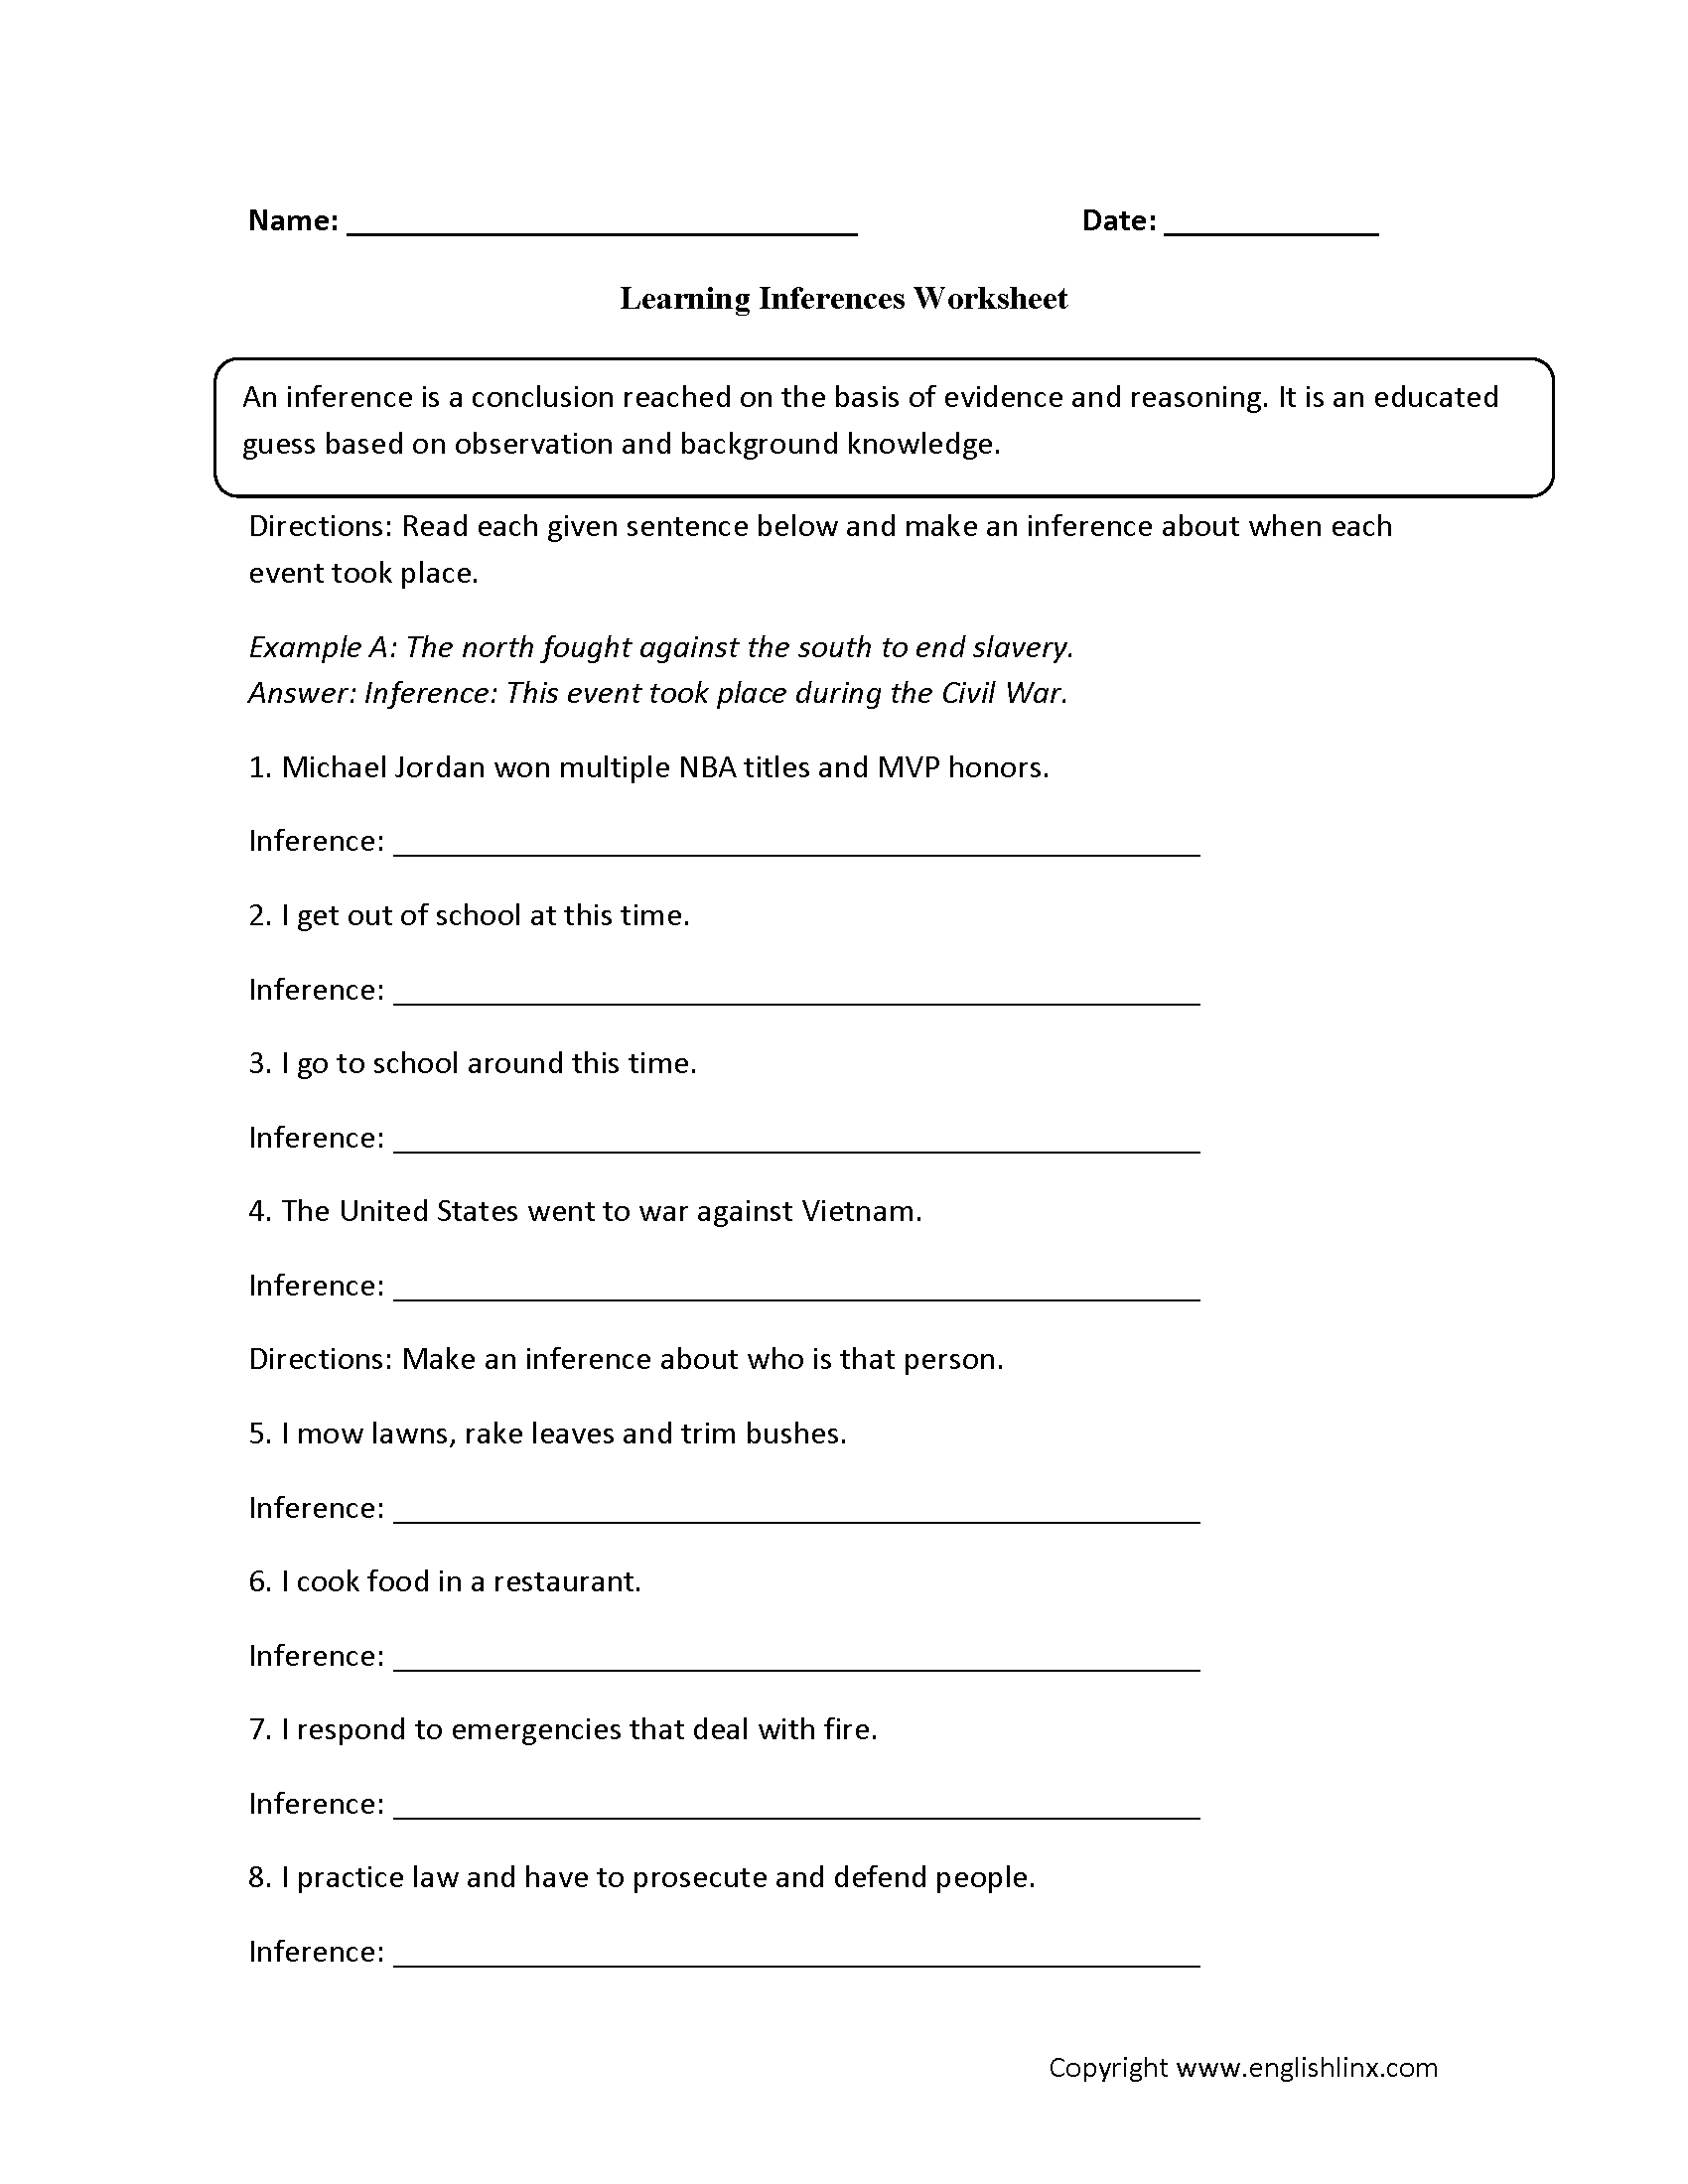 Inferences Worksheets for 7th Grade Image